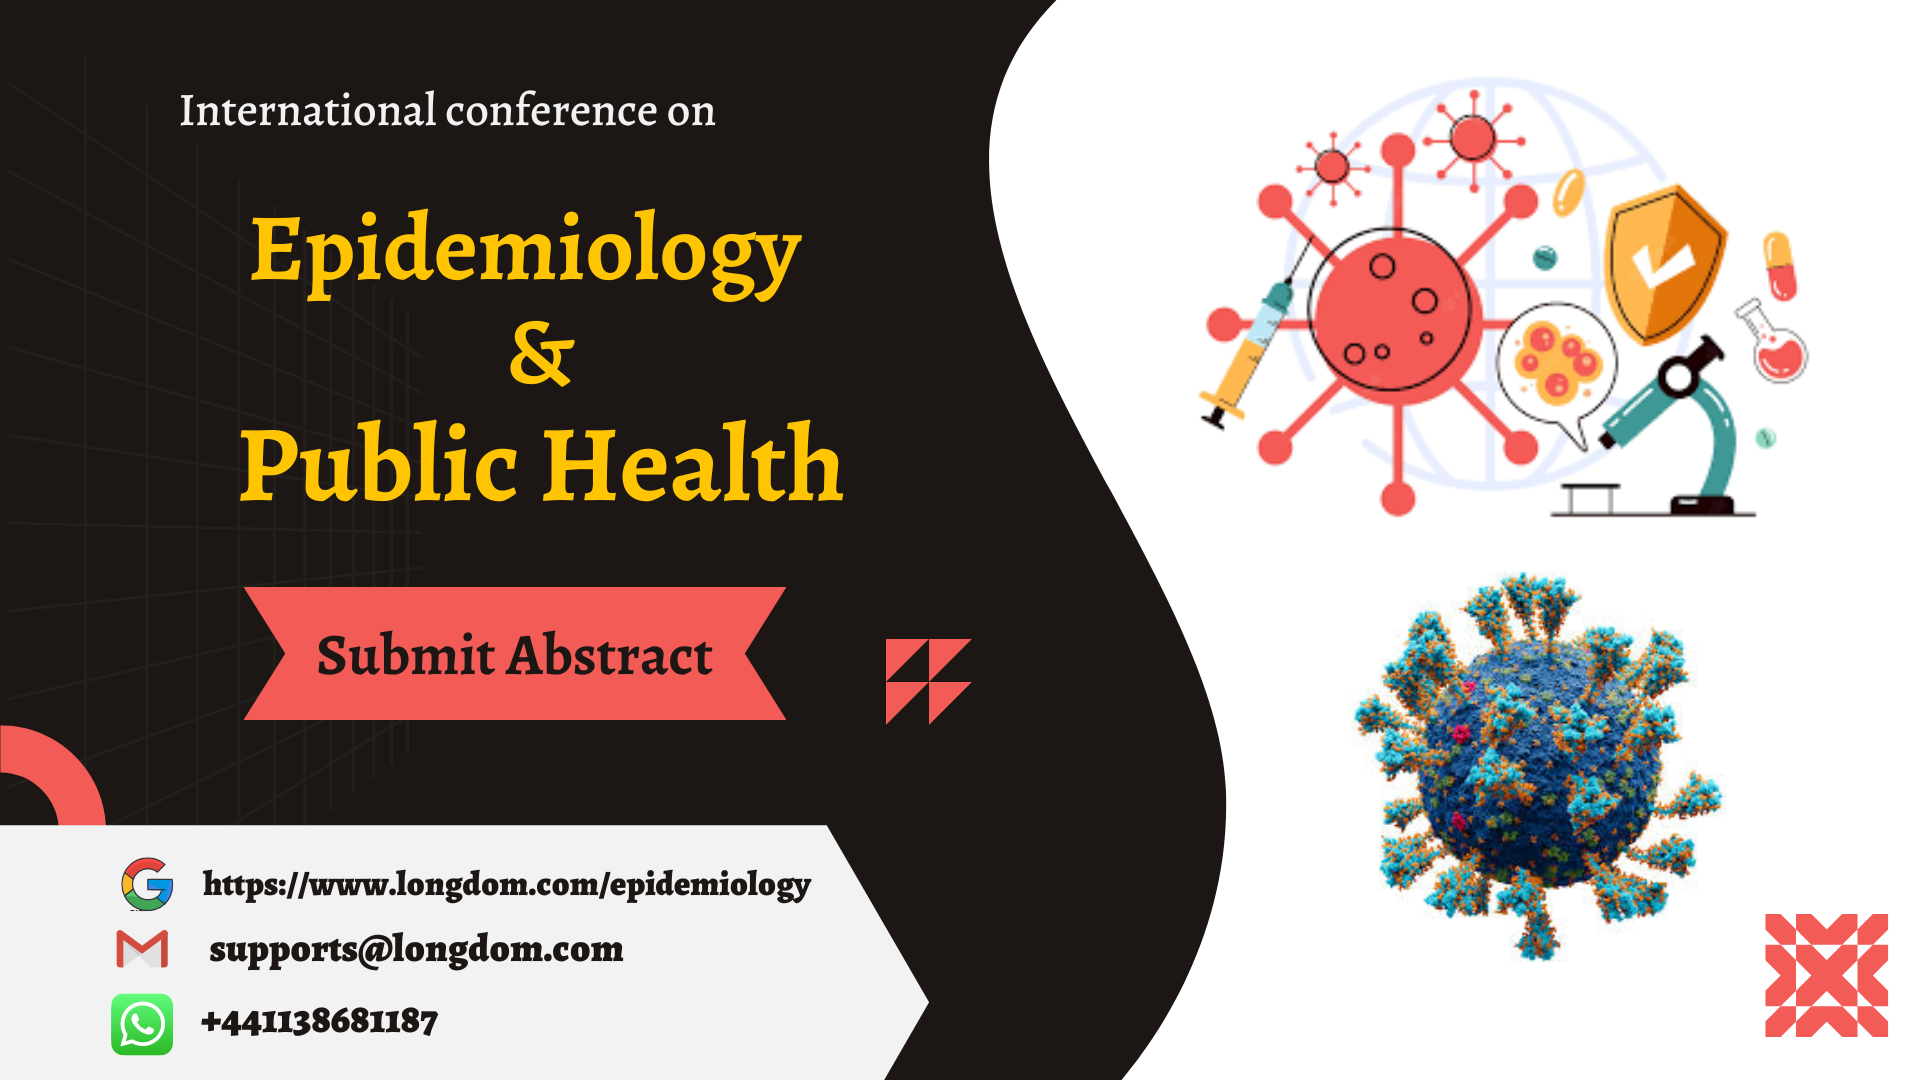 Advances in the Epidemiology & Public Health Epidemiology conference